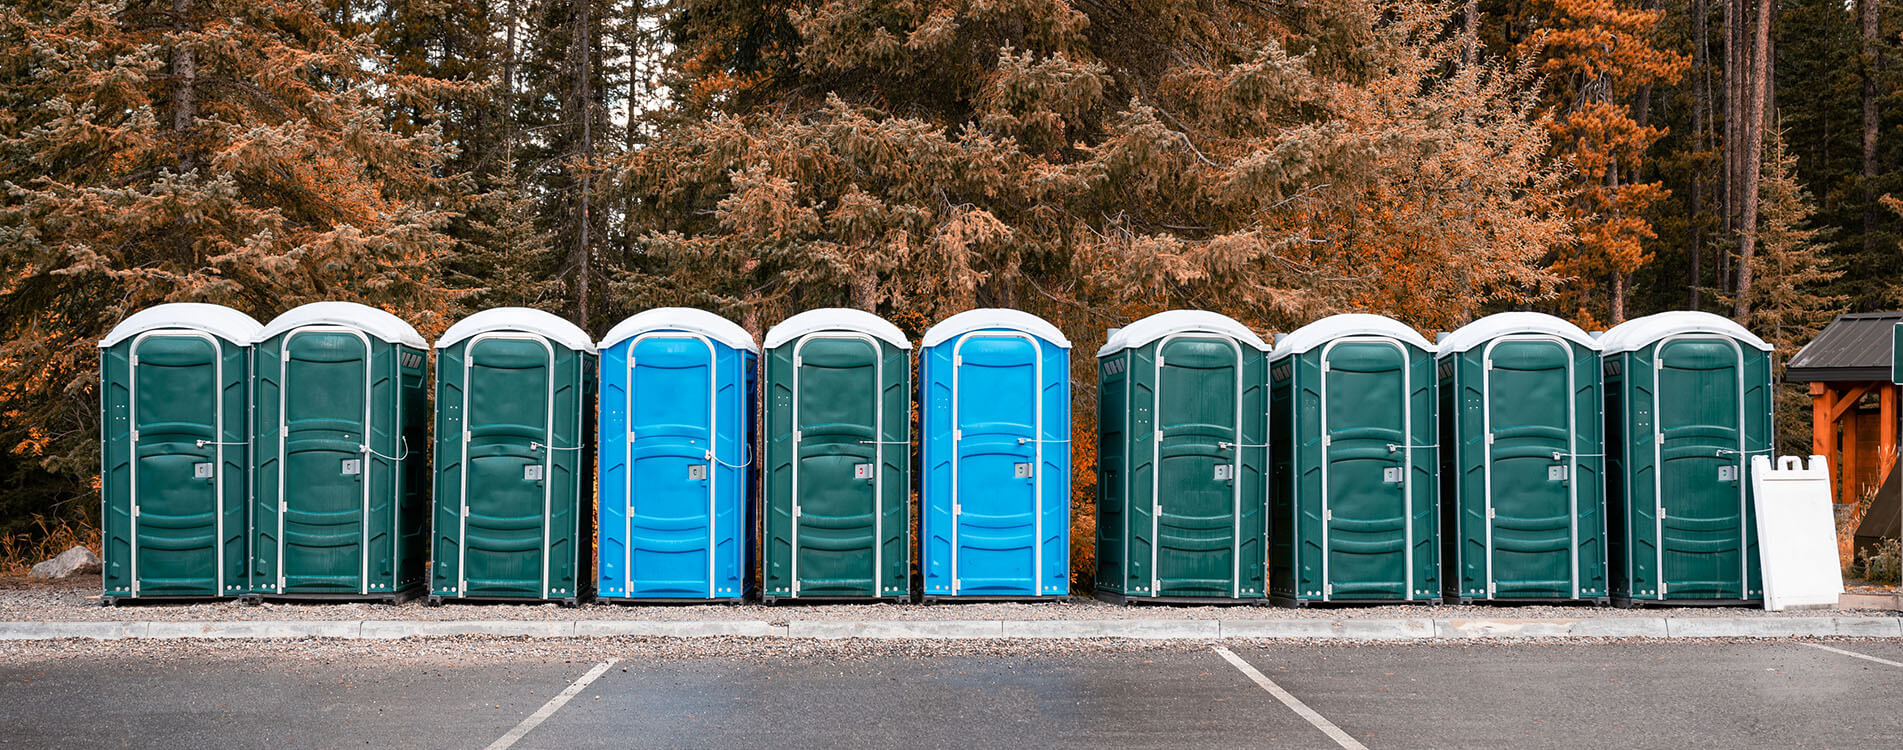 Edgewater, Glen Burnie and Pasadena
    Portable Toilet Rentals, Roll-Off Dumpster Rentals and Septic Company